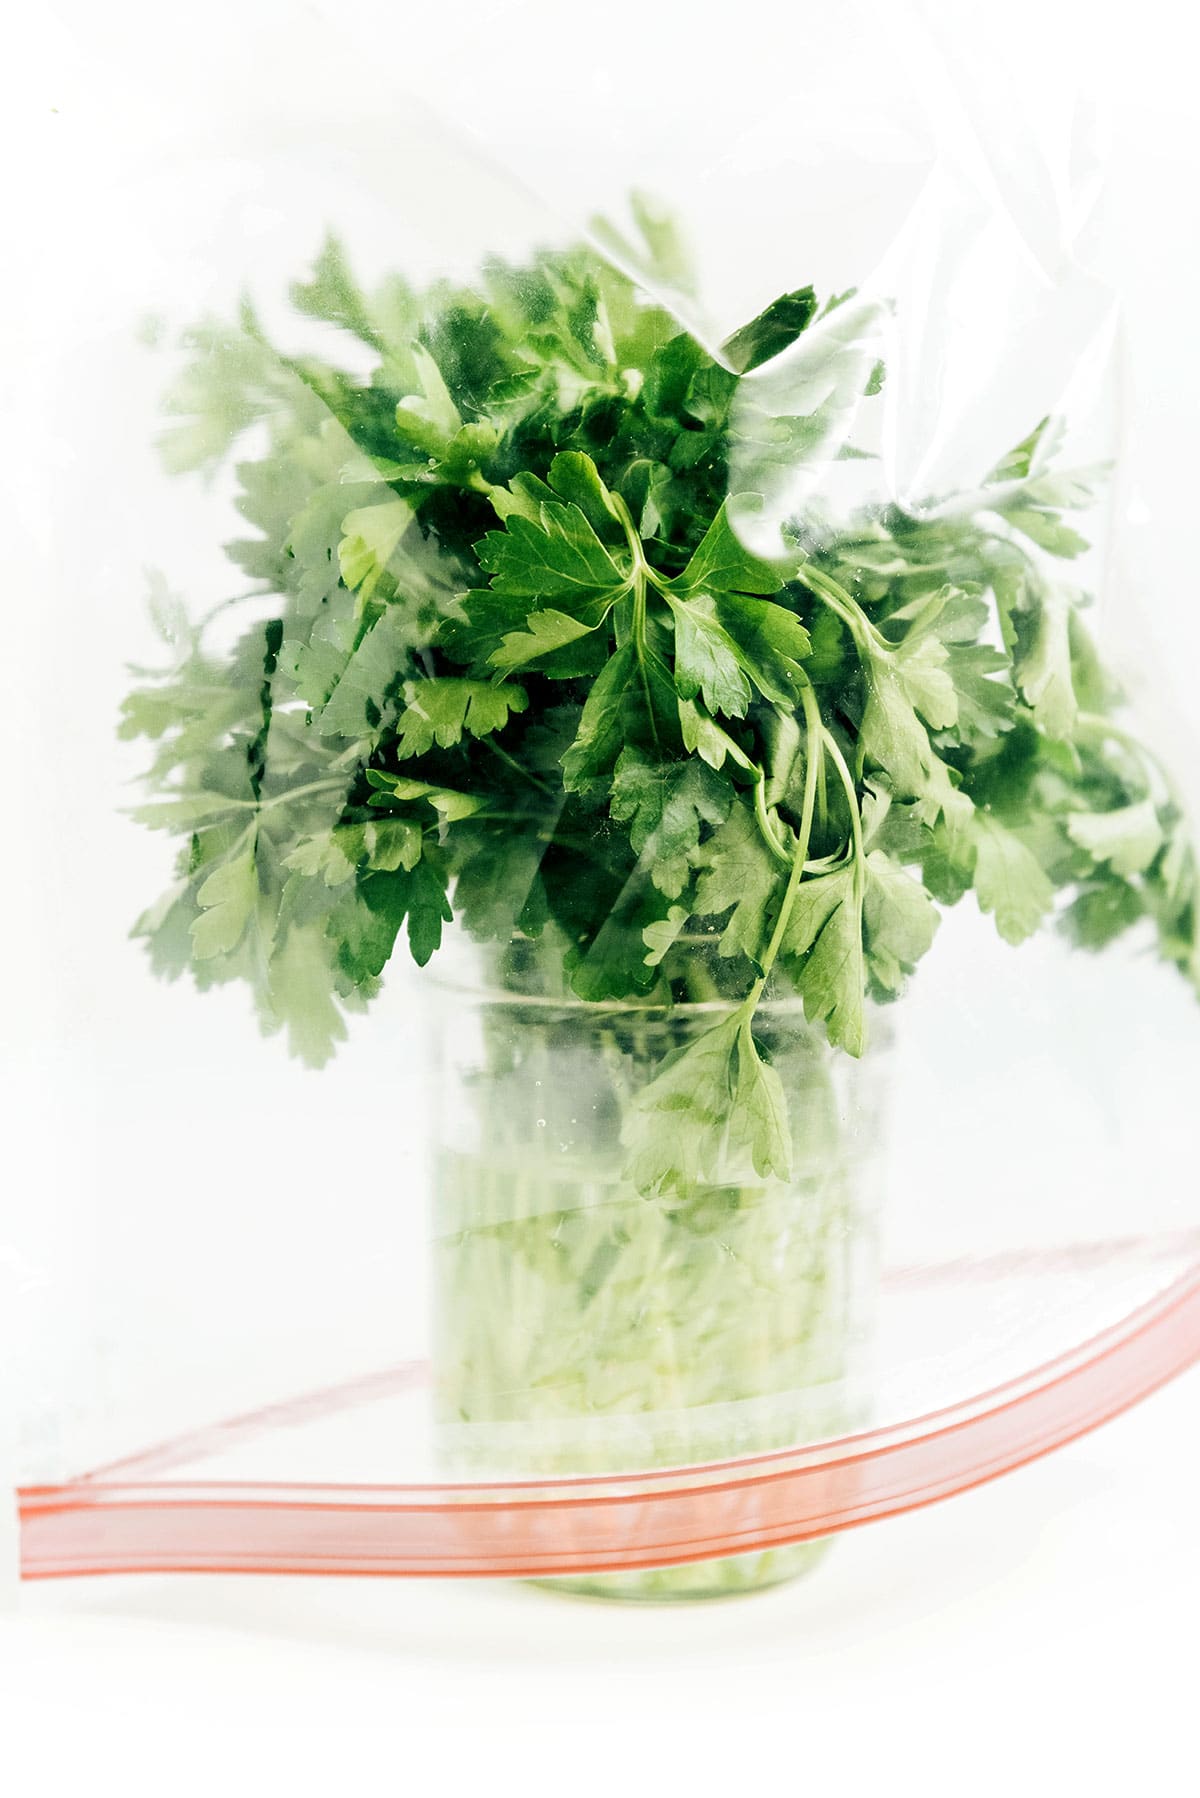 A plastic bag covering a mason jar filled with water and a bunch of herbs